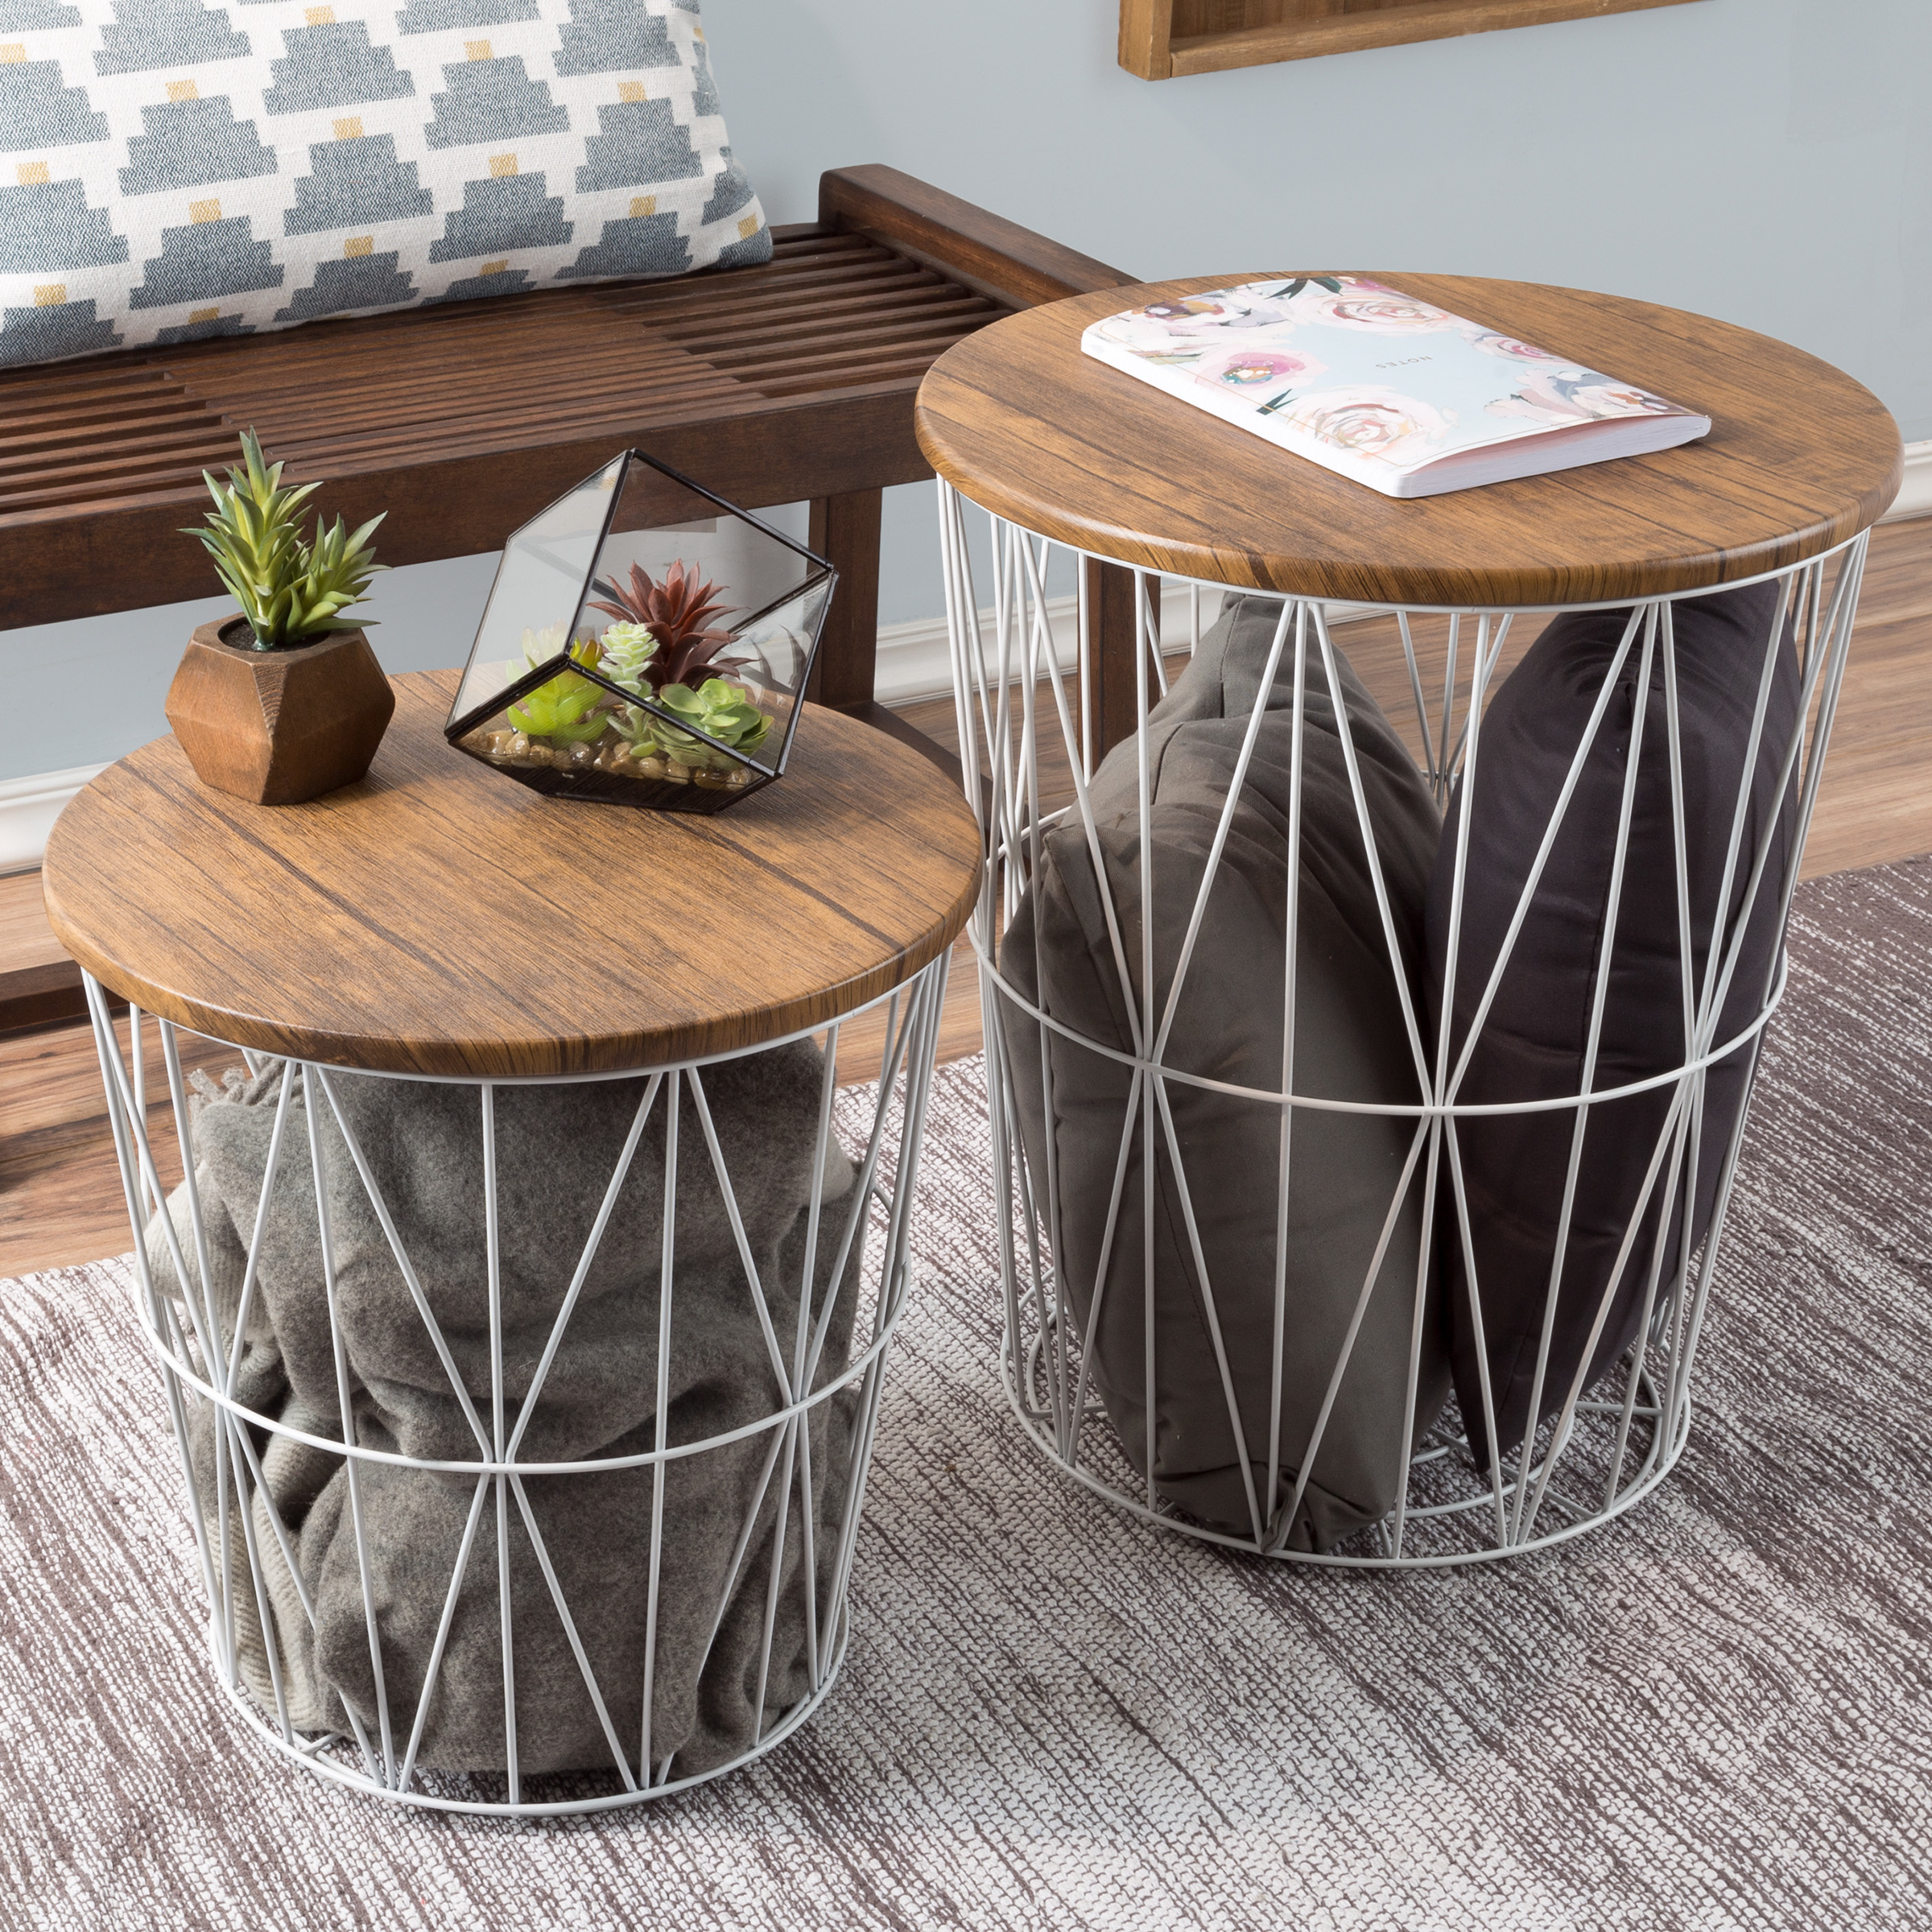 Nesting End Tables Metal Basket Wooden Top 20 And 15 In Multi-Use Furniture